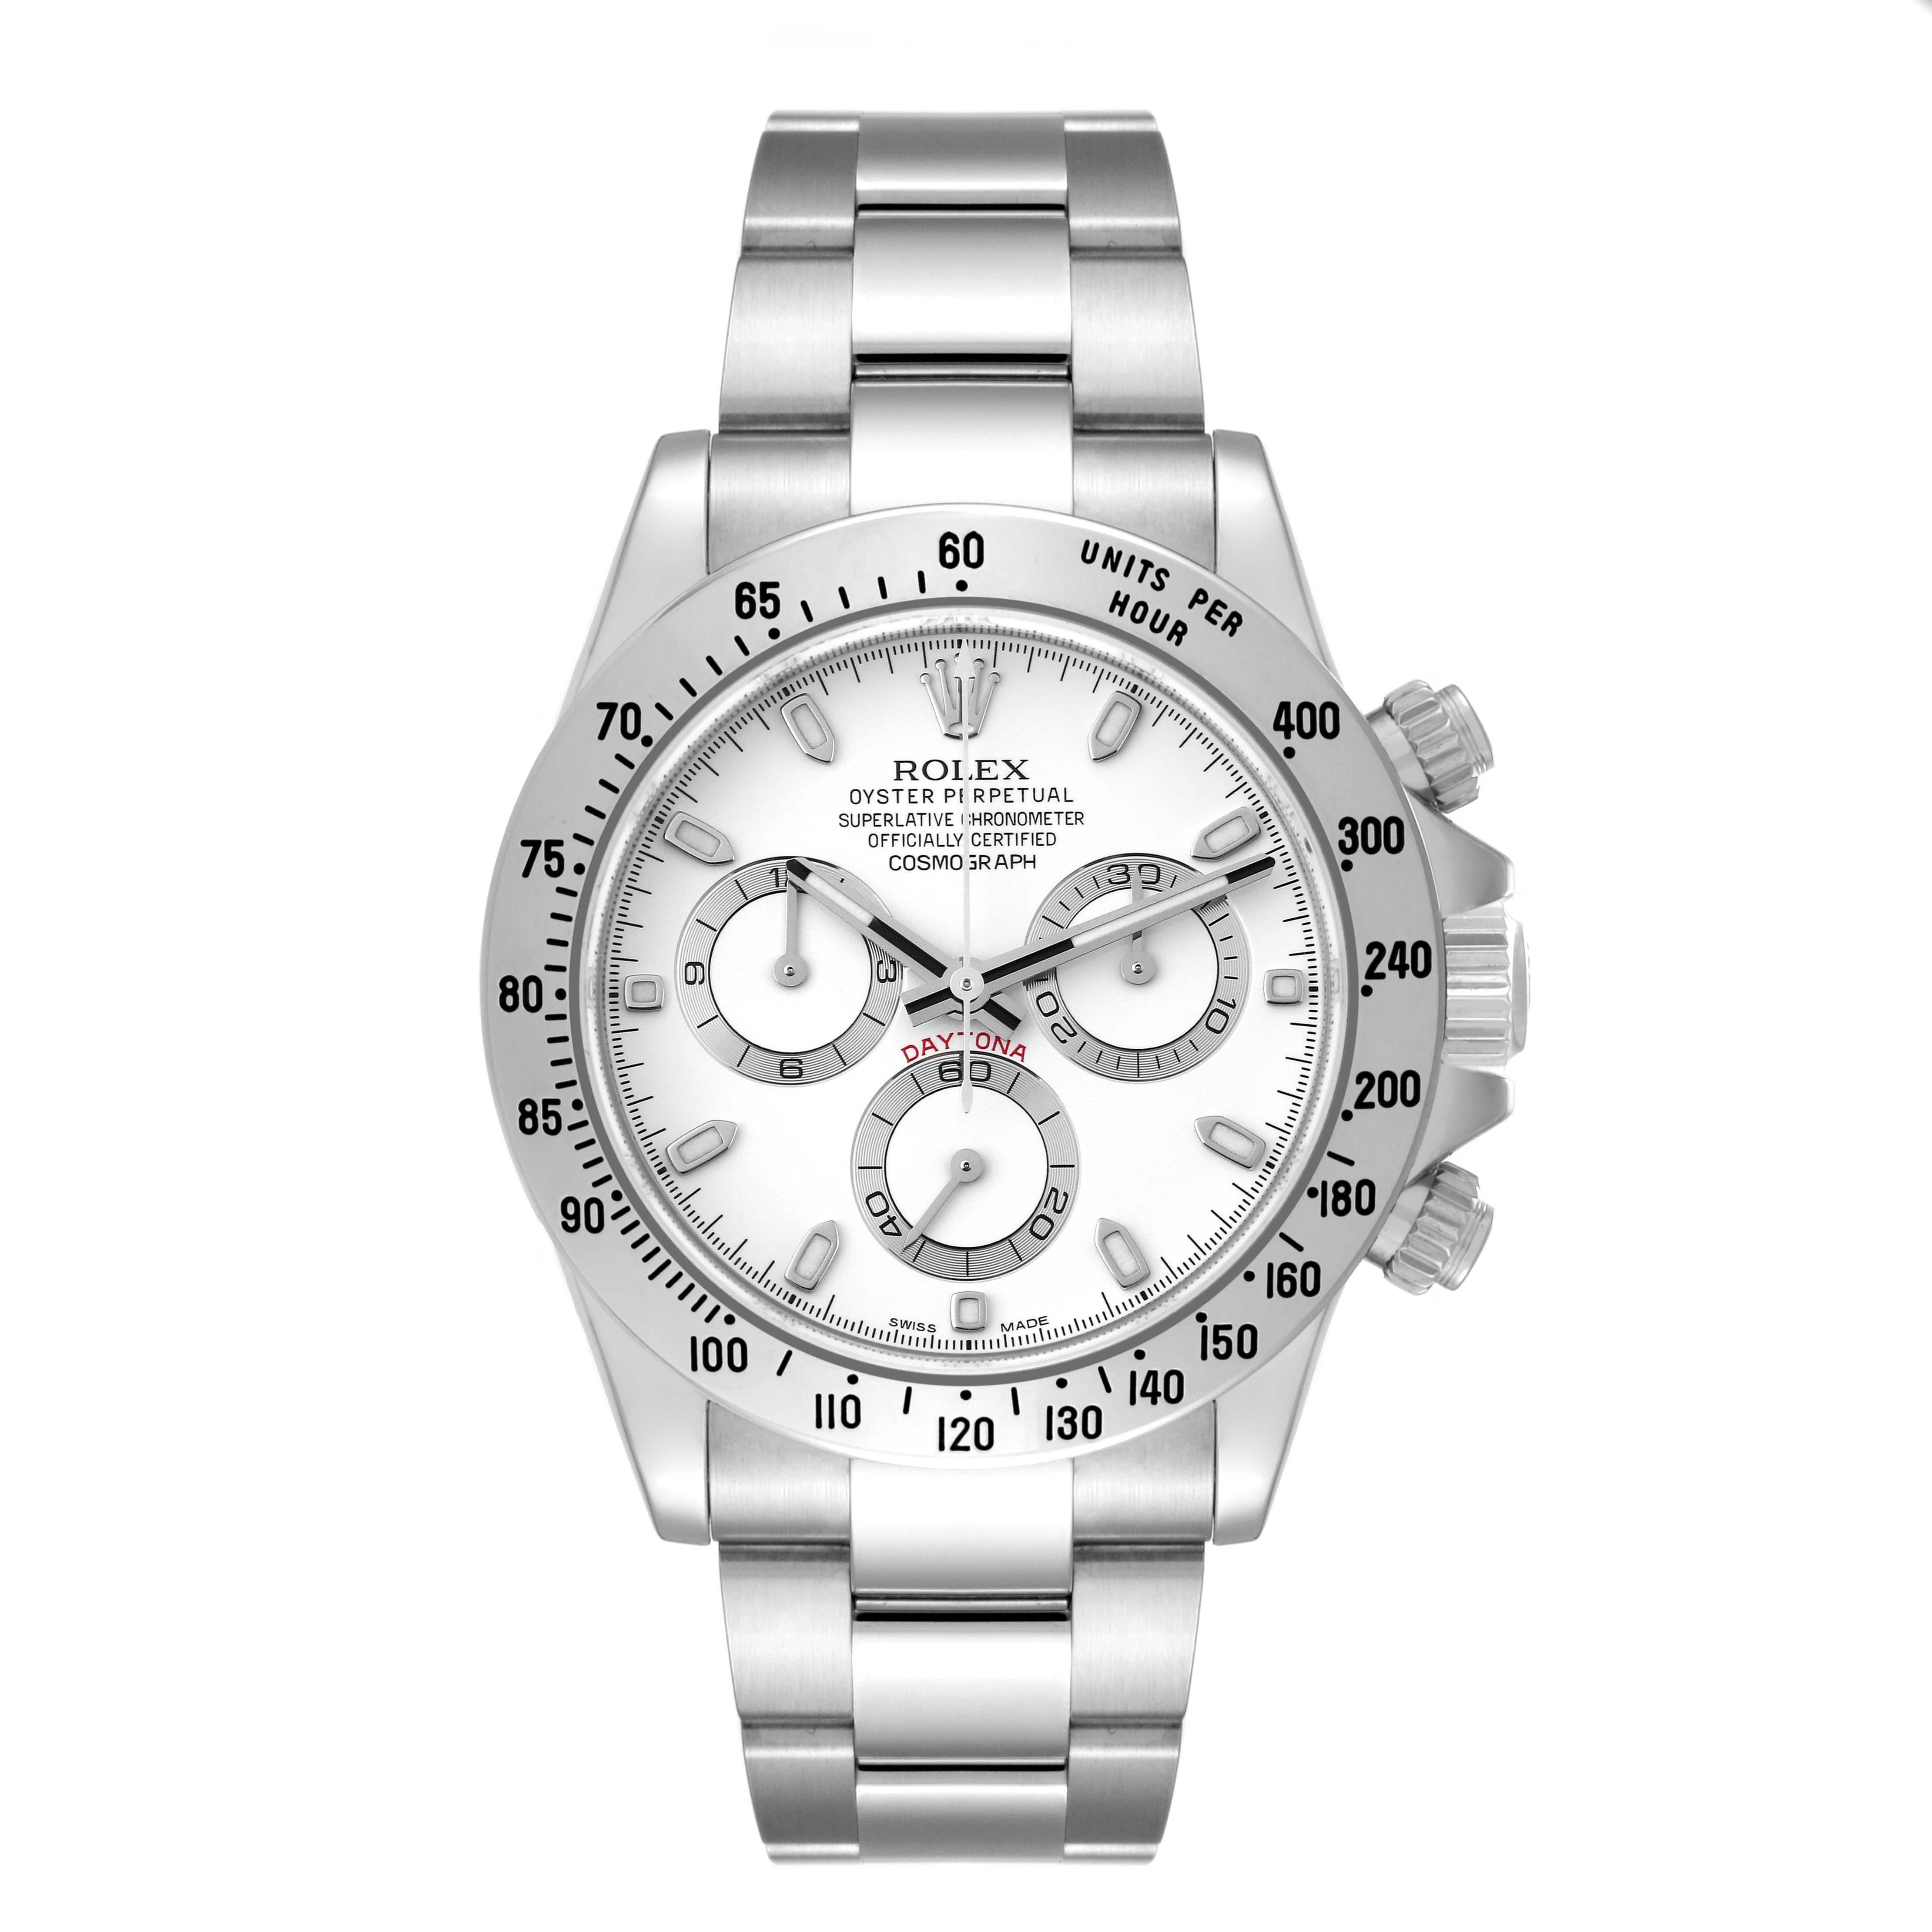 Rolex Daytona White Dial Chronograph Steel Mens Watch 116520 Box Card. Officially certified chronometer self-winding Chronograph movement. Stainless steel case 40.0 mm in diameter. Special screw-down push buttons. Stainless steel tachymeter engraved